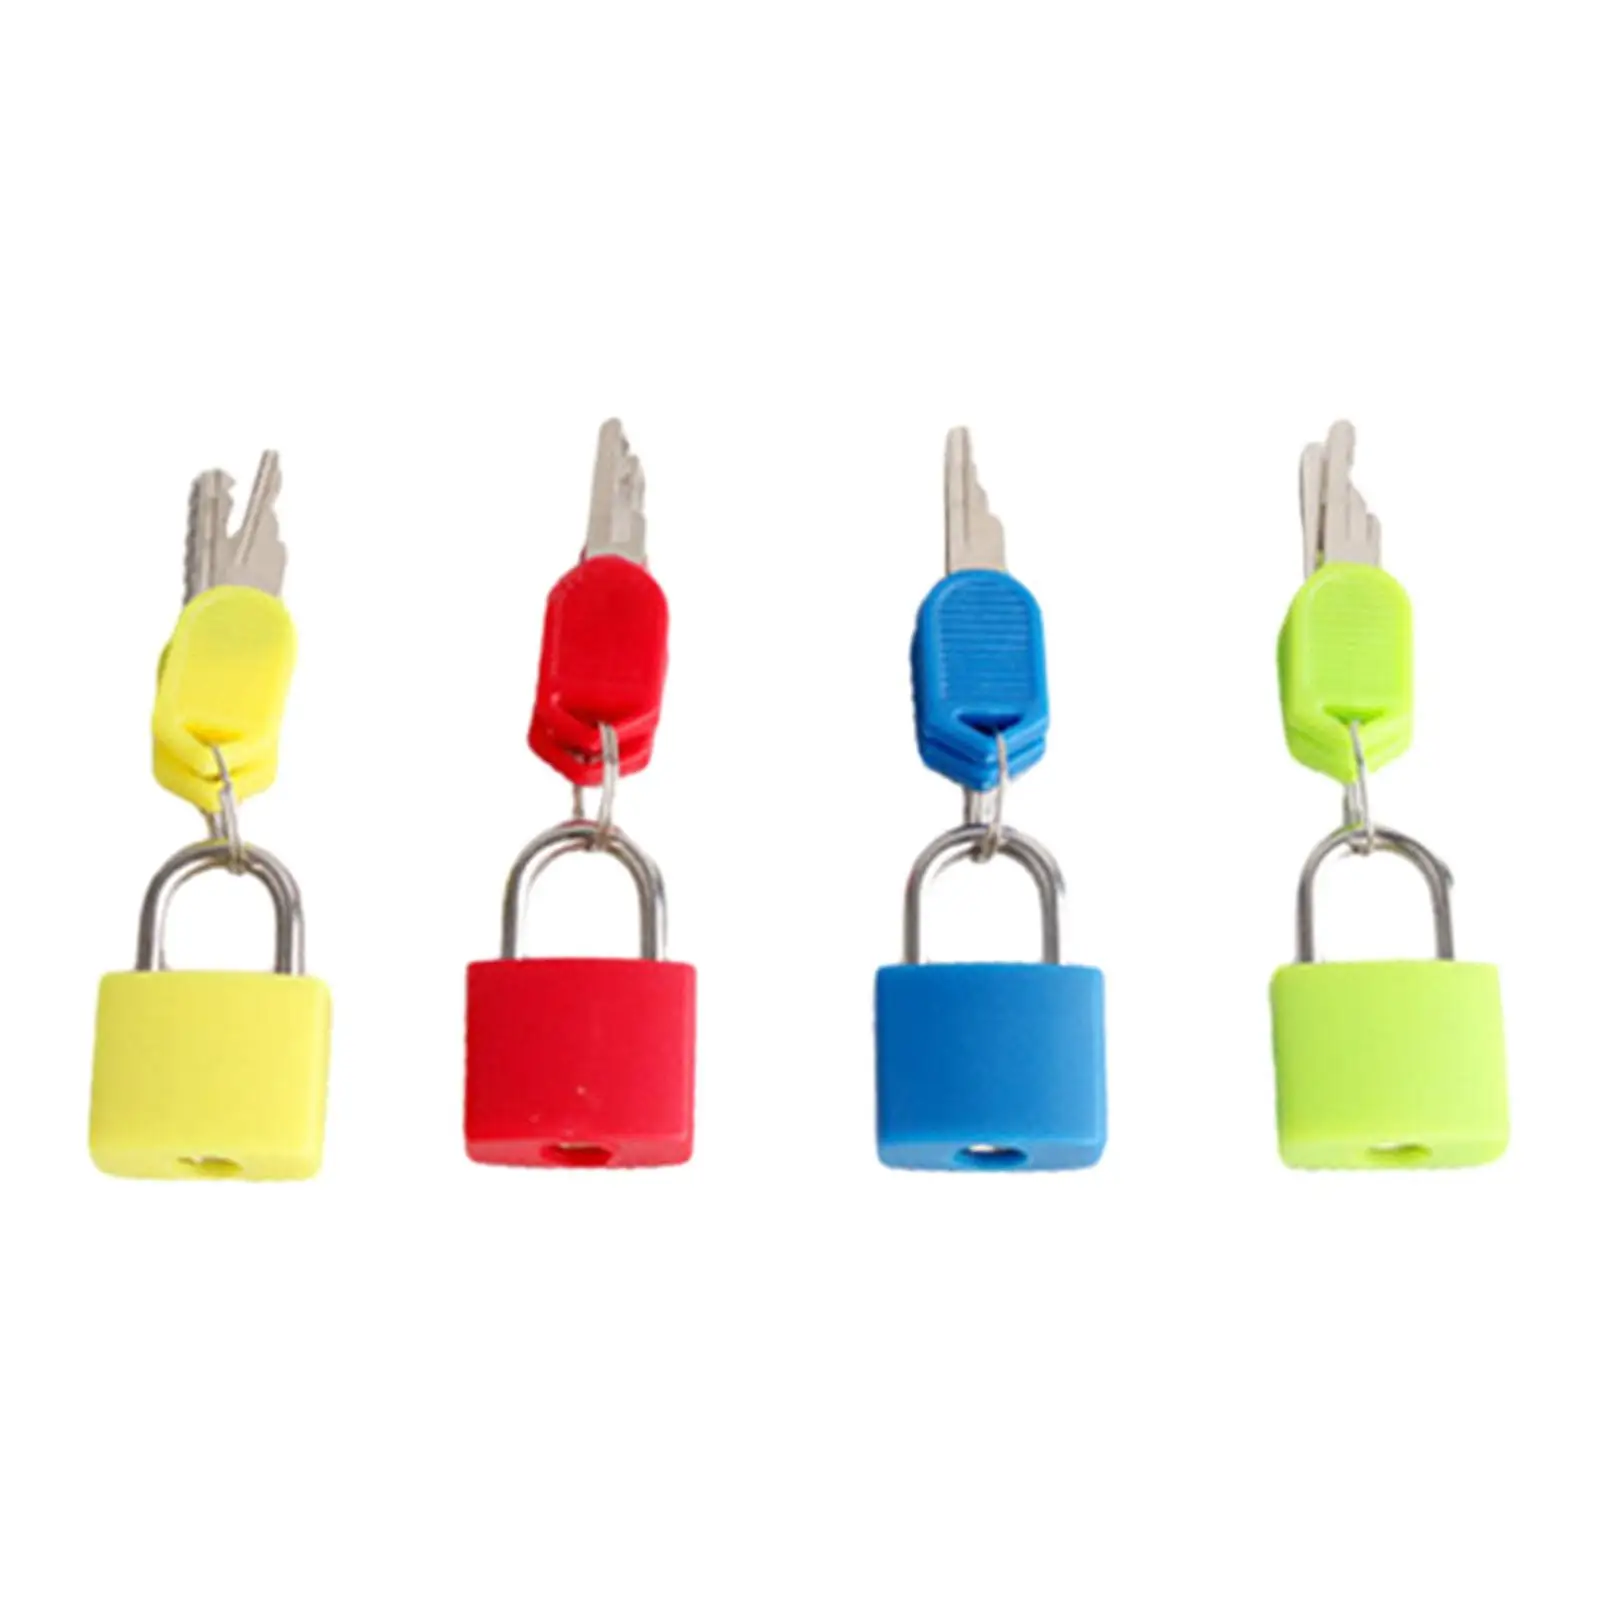 Kids Learning Locks with Keys Preschool Games Educational Toys Montessori Material Color Matching Lock Set for Kids Toddlers